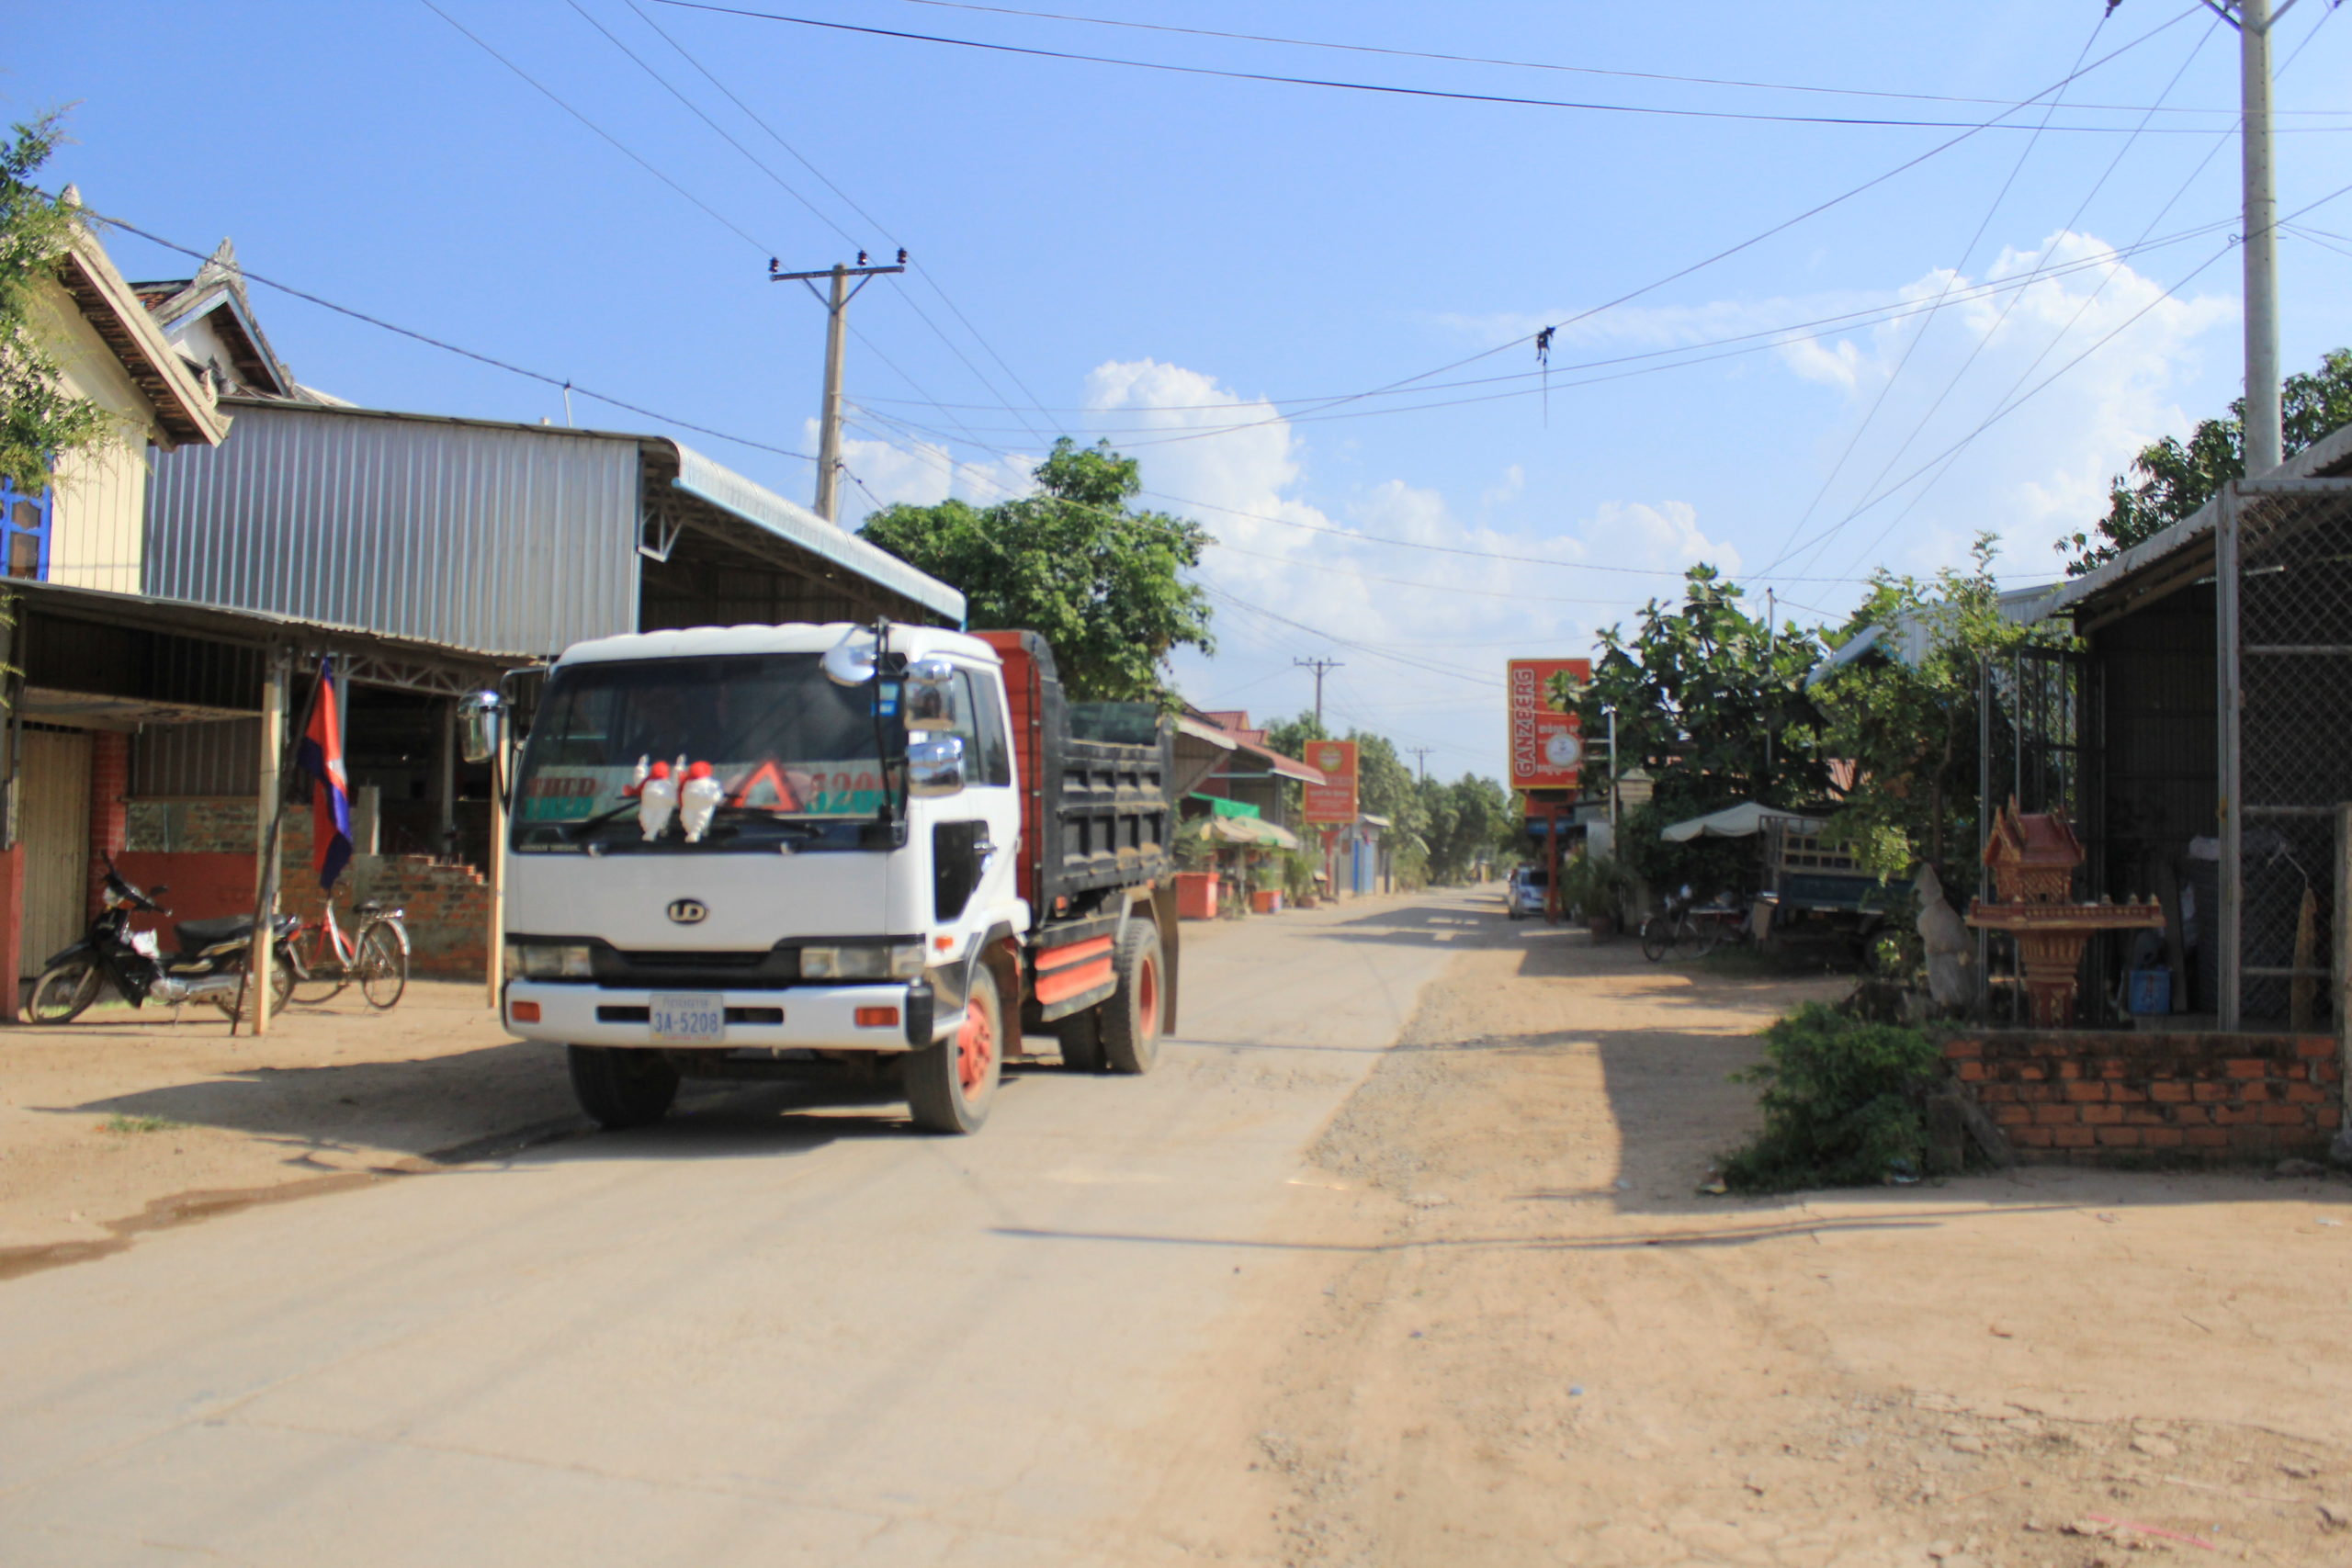 A truck used to haul sand and gravel pulls into a village on Koh Dach on Friday, April 22, 2022. (Andrew Haffner/VOD)